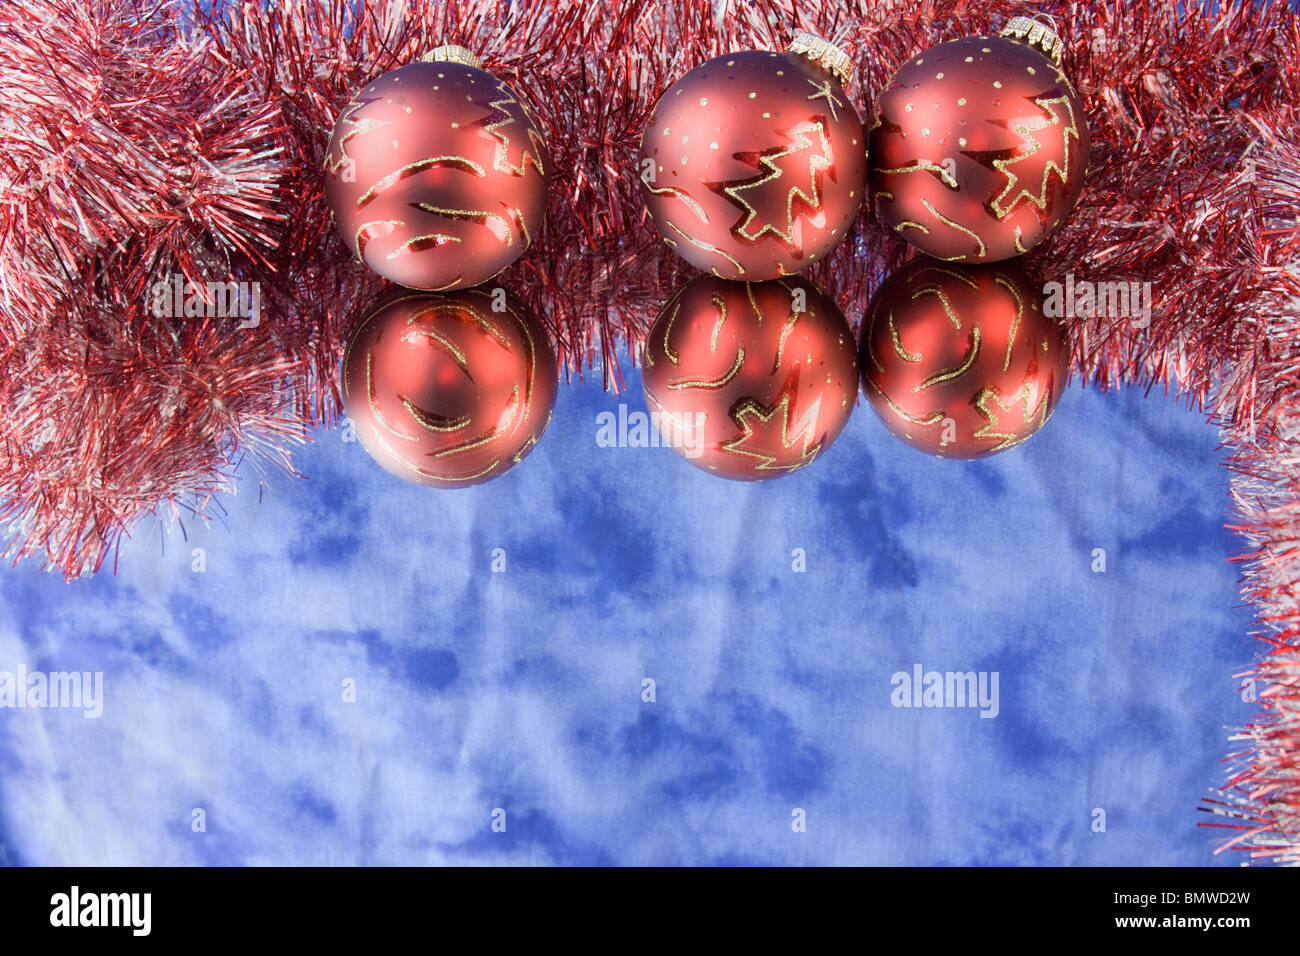 three red Christmas baubles with tree outlines, red and white tinsel, reflections and copyspace Stock Photo